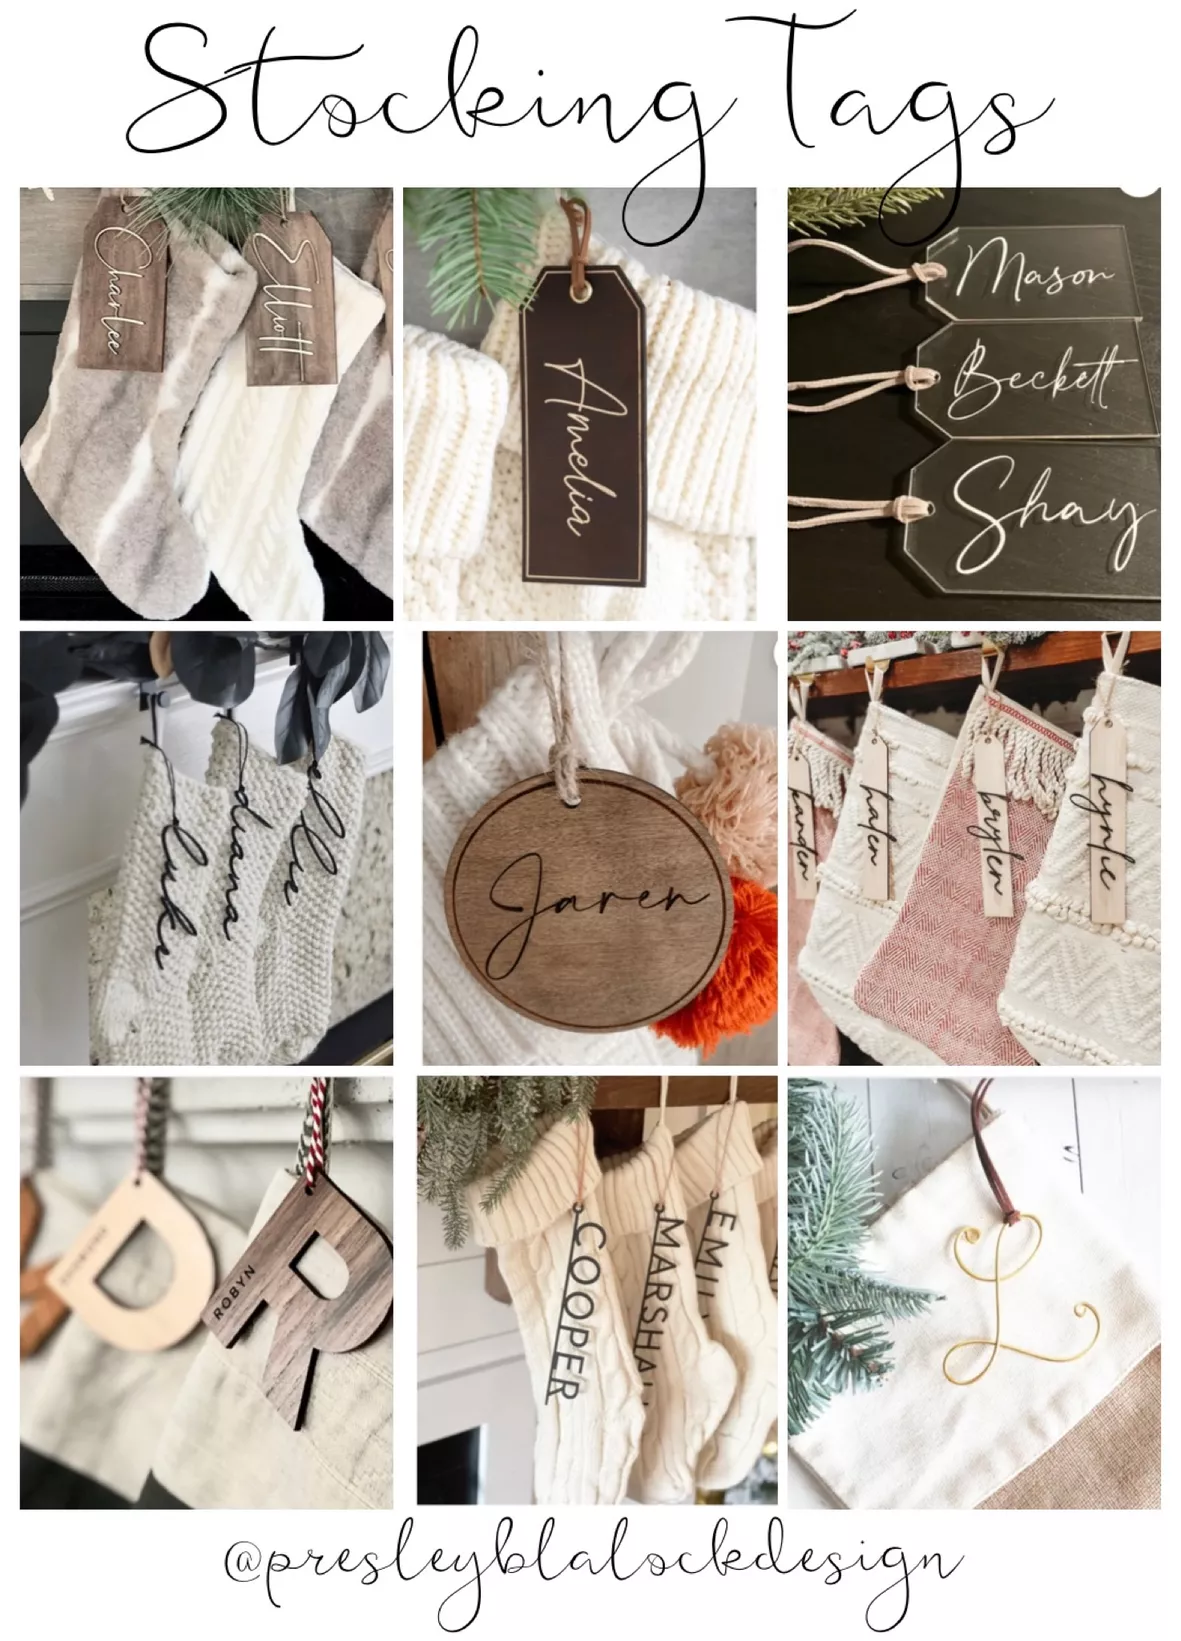 Custom Stocking Tags Names for Stockings Personalized Stocking